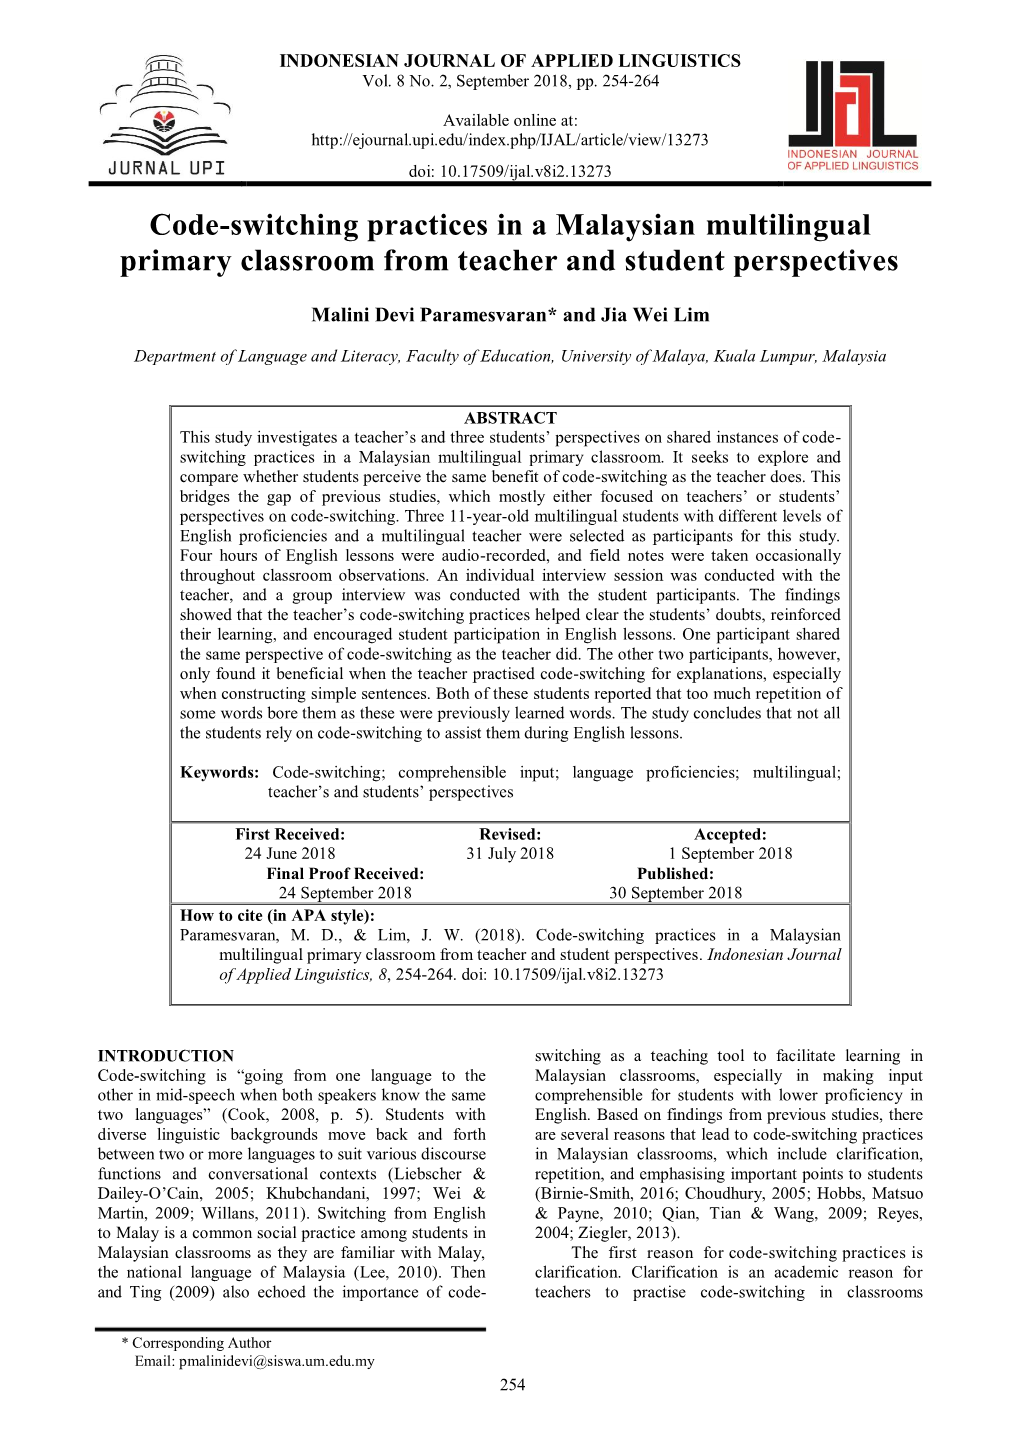 Code-Switching Practices in a Malaysian Multilingual Primary Classroom from Teacher and Student Perspectives